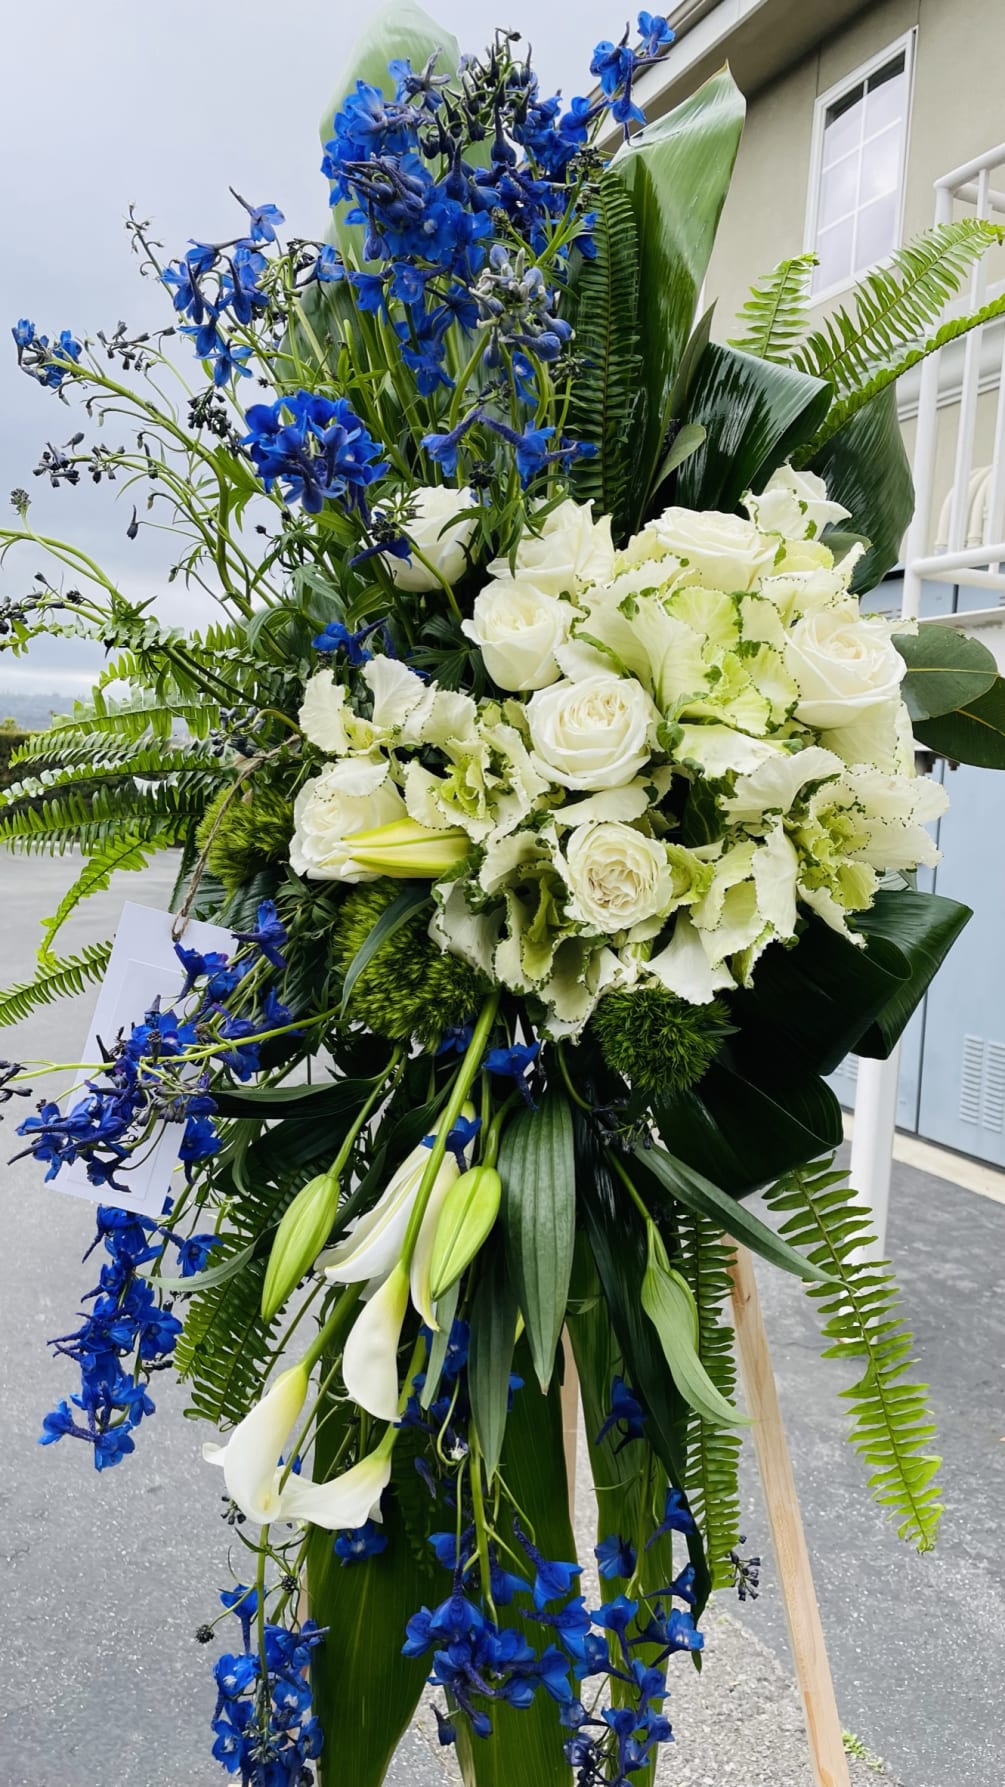 This beautiful spray consists of white roses, white lilies, white callas, blue